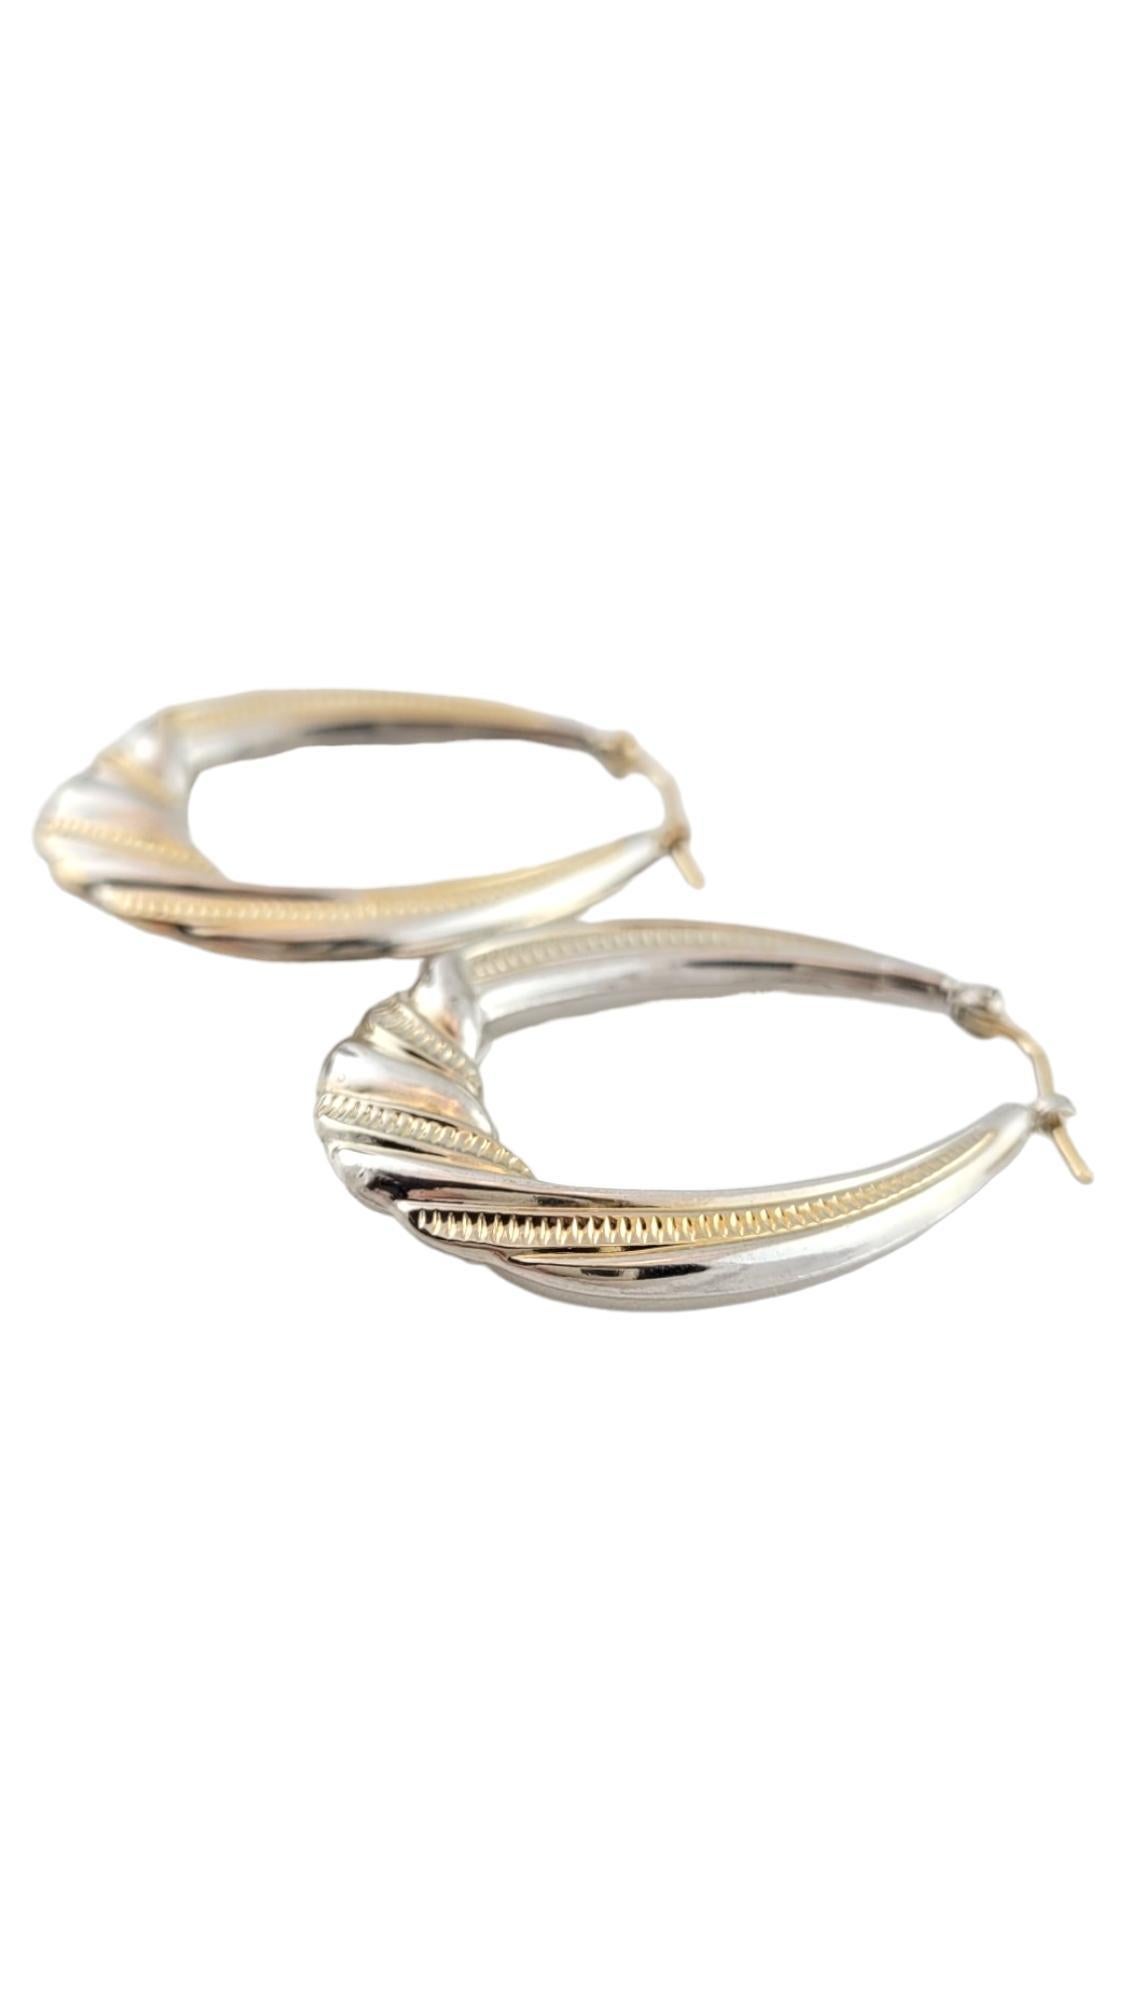 Vintage 14K 2-Tone Yellow and White Gold Hoop Earrings

This gorgeous set of 2 toned hoop earrings are crafted from both 14K white and yellow gold and have a beautiful textured pattern!

Size: 34.4mm X 26.9mm X 3.4mm
(Approximately 3 mm